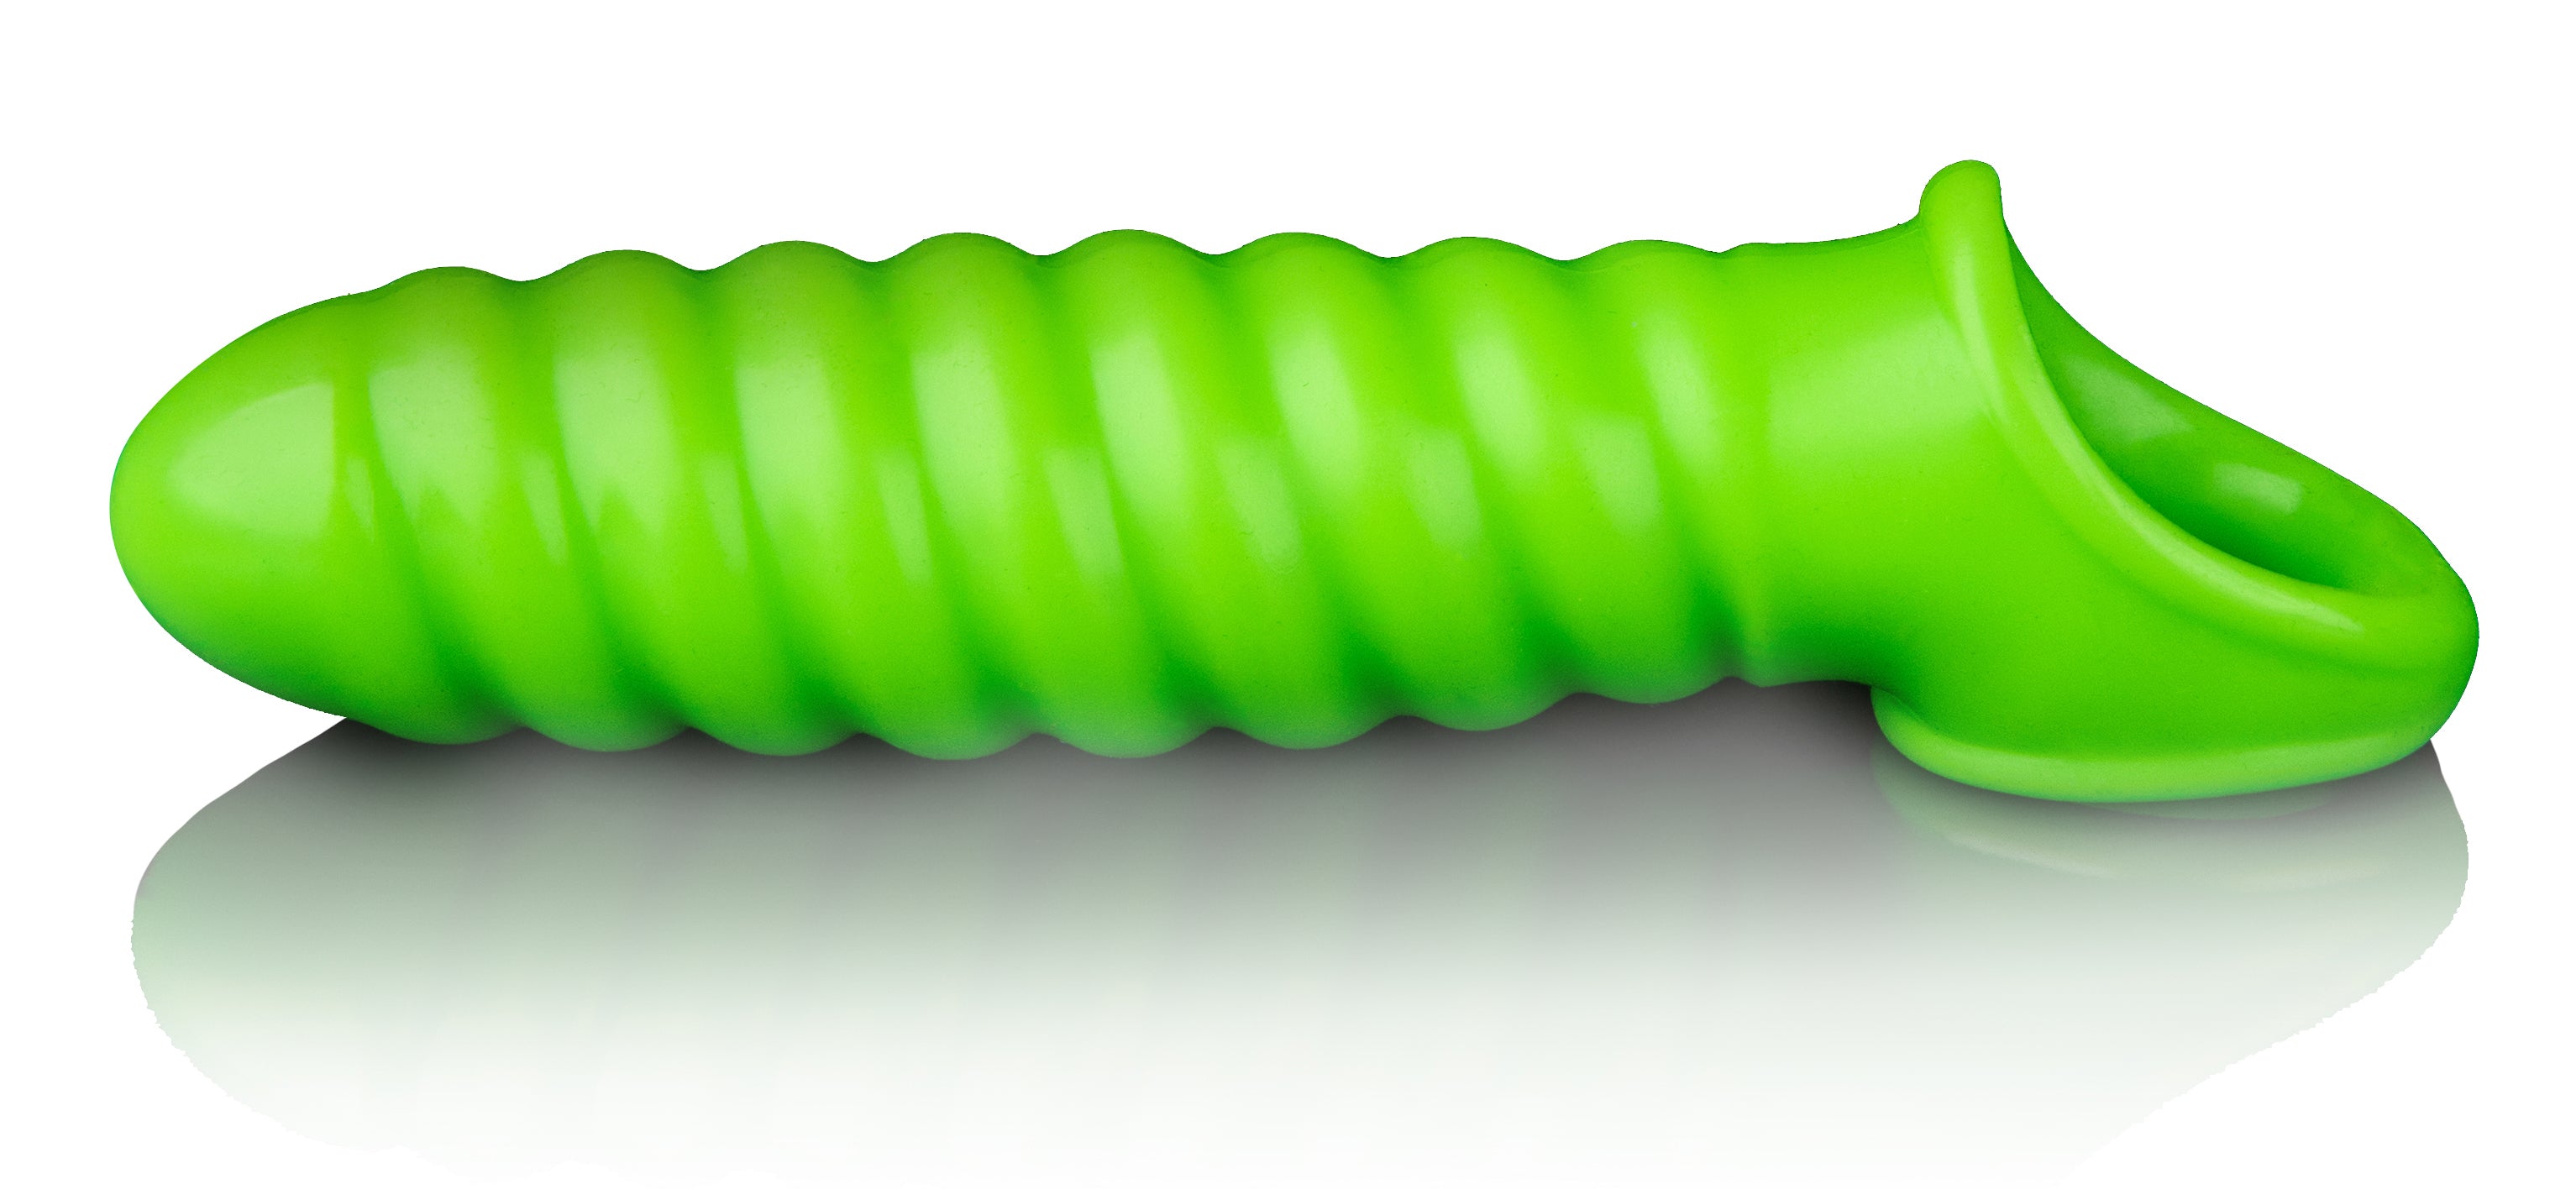 Ouch! Glow in the Dark Swirl Stretchy Penis Sleeve - Illuminate Your Pleasure